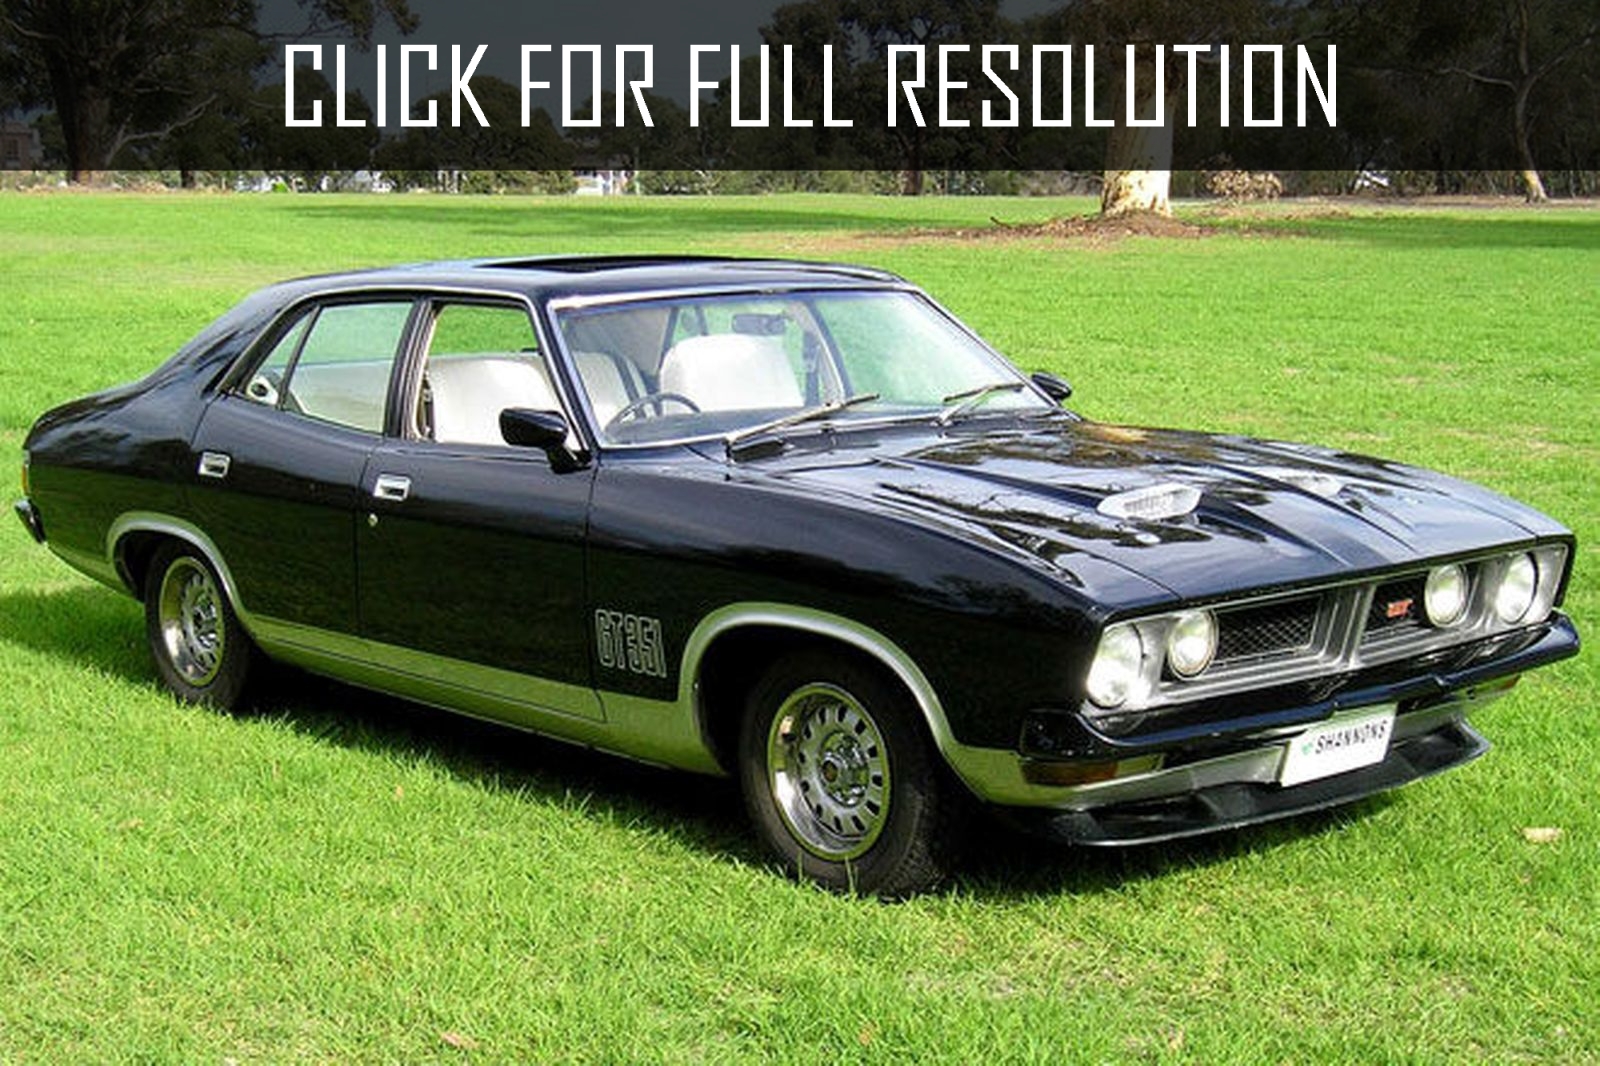 Ford Falcon Xb Gt amazing photo gallery, some information and